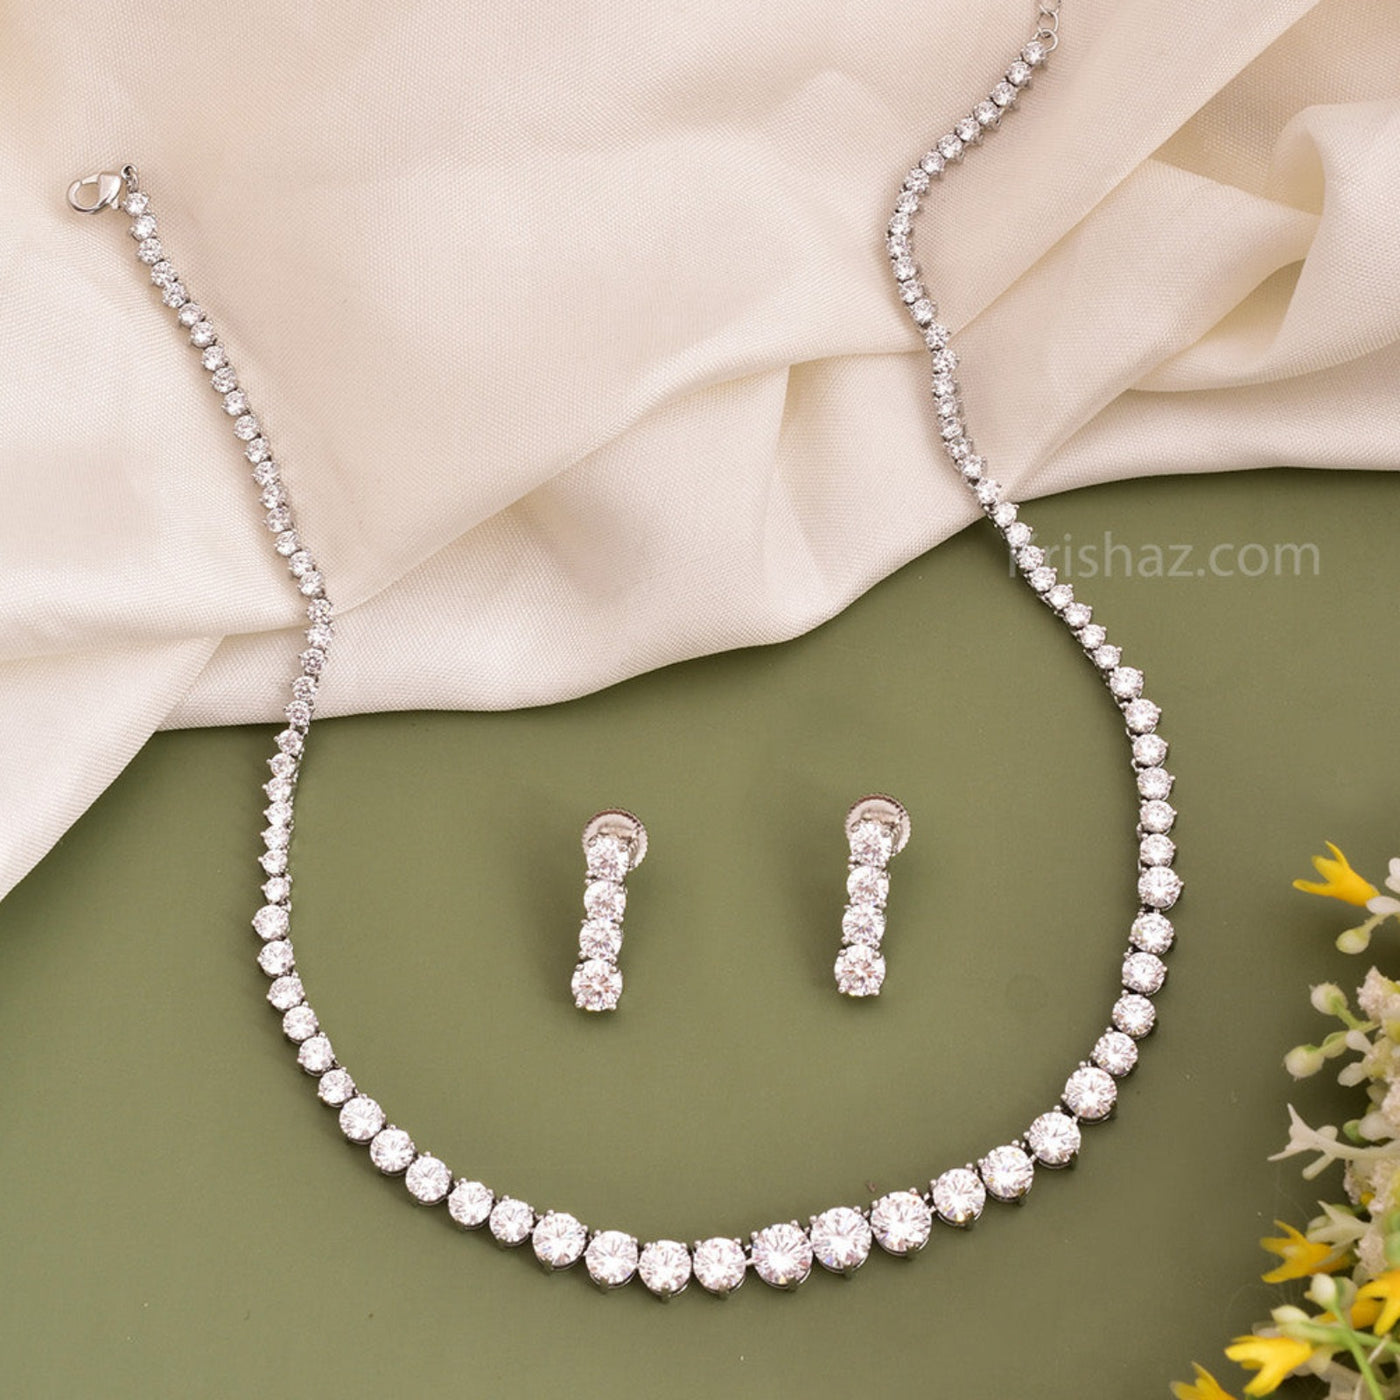 William Solitaire Look Rhodium Plated Necklace With Matching Earrings